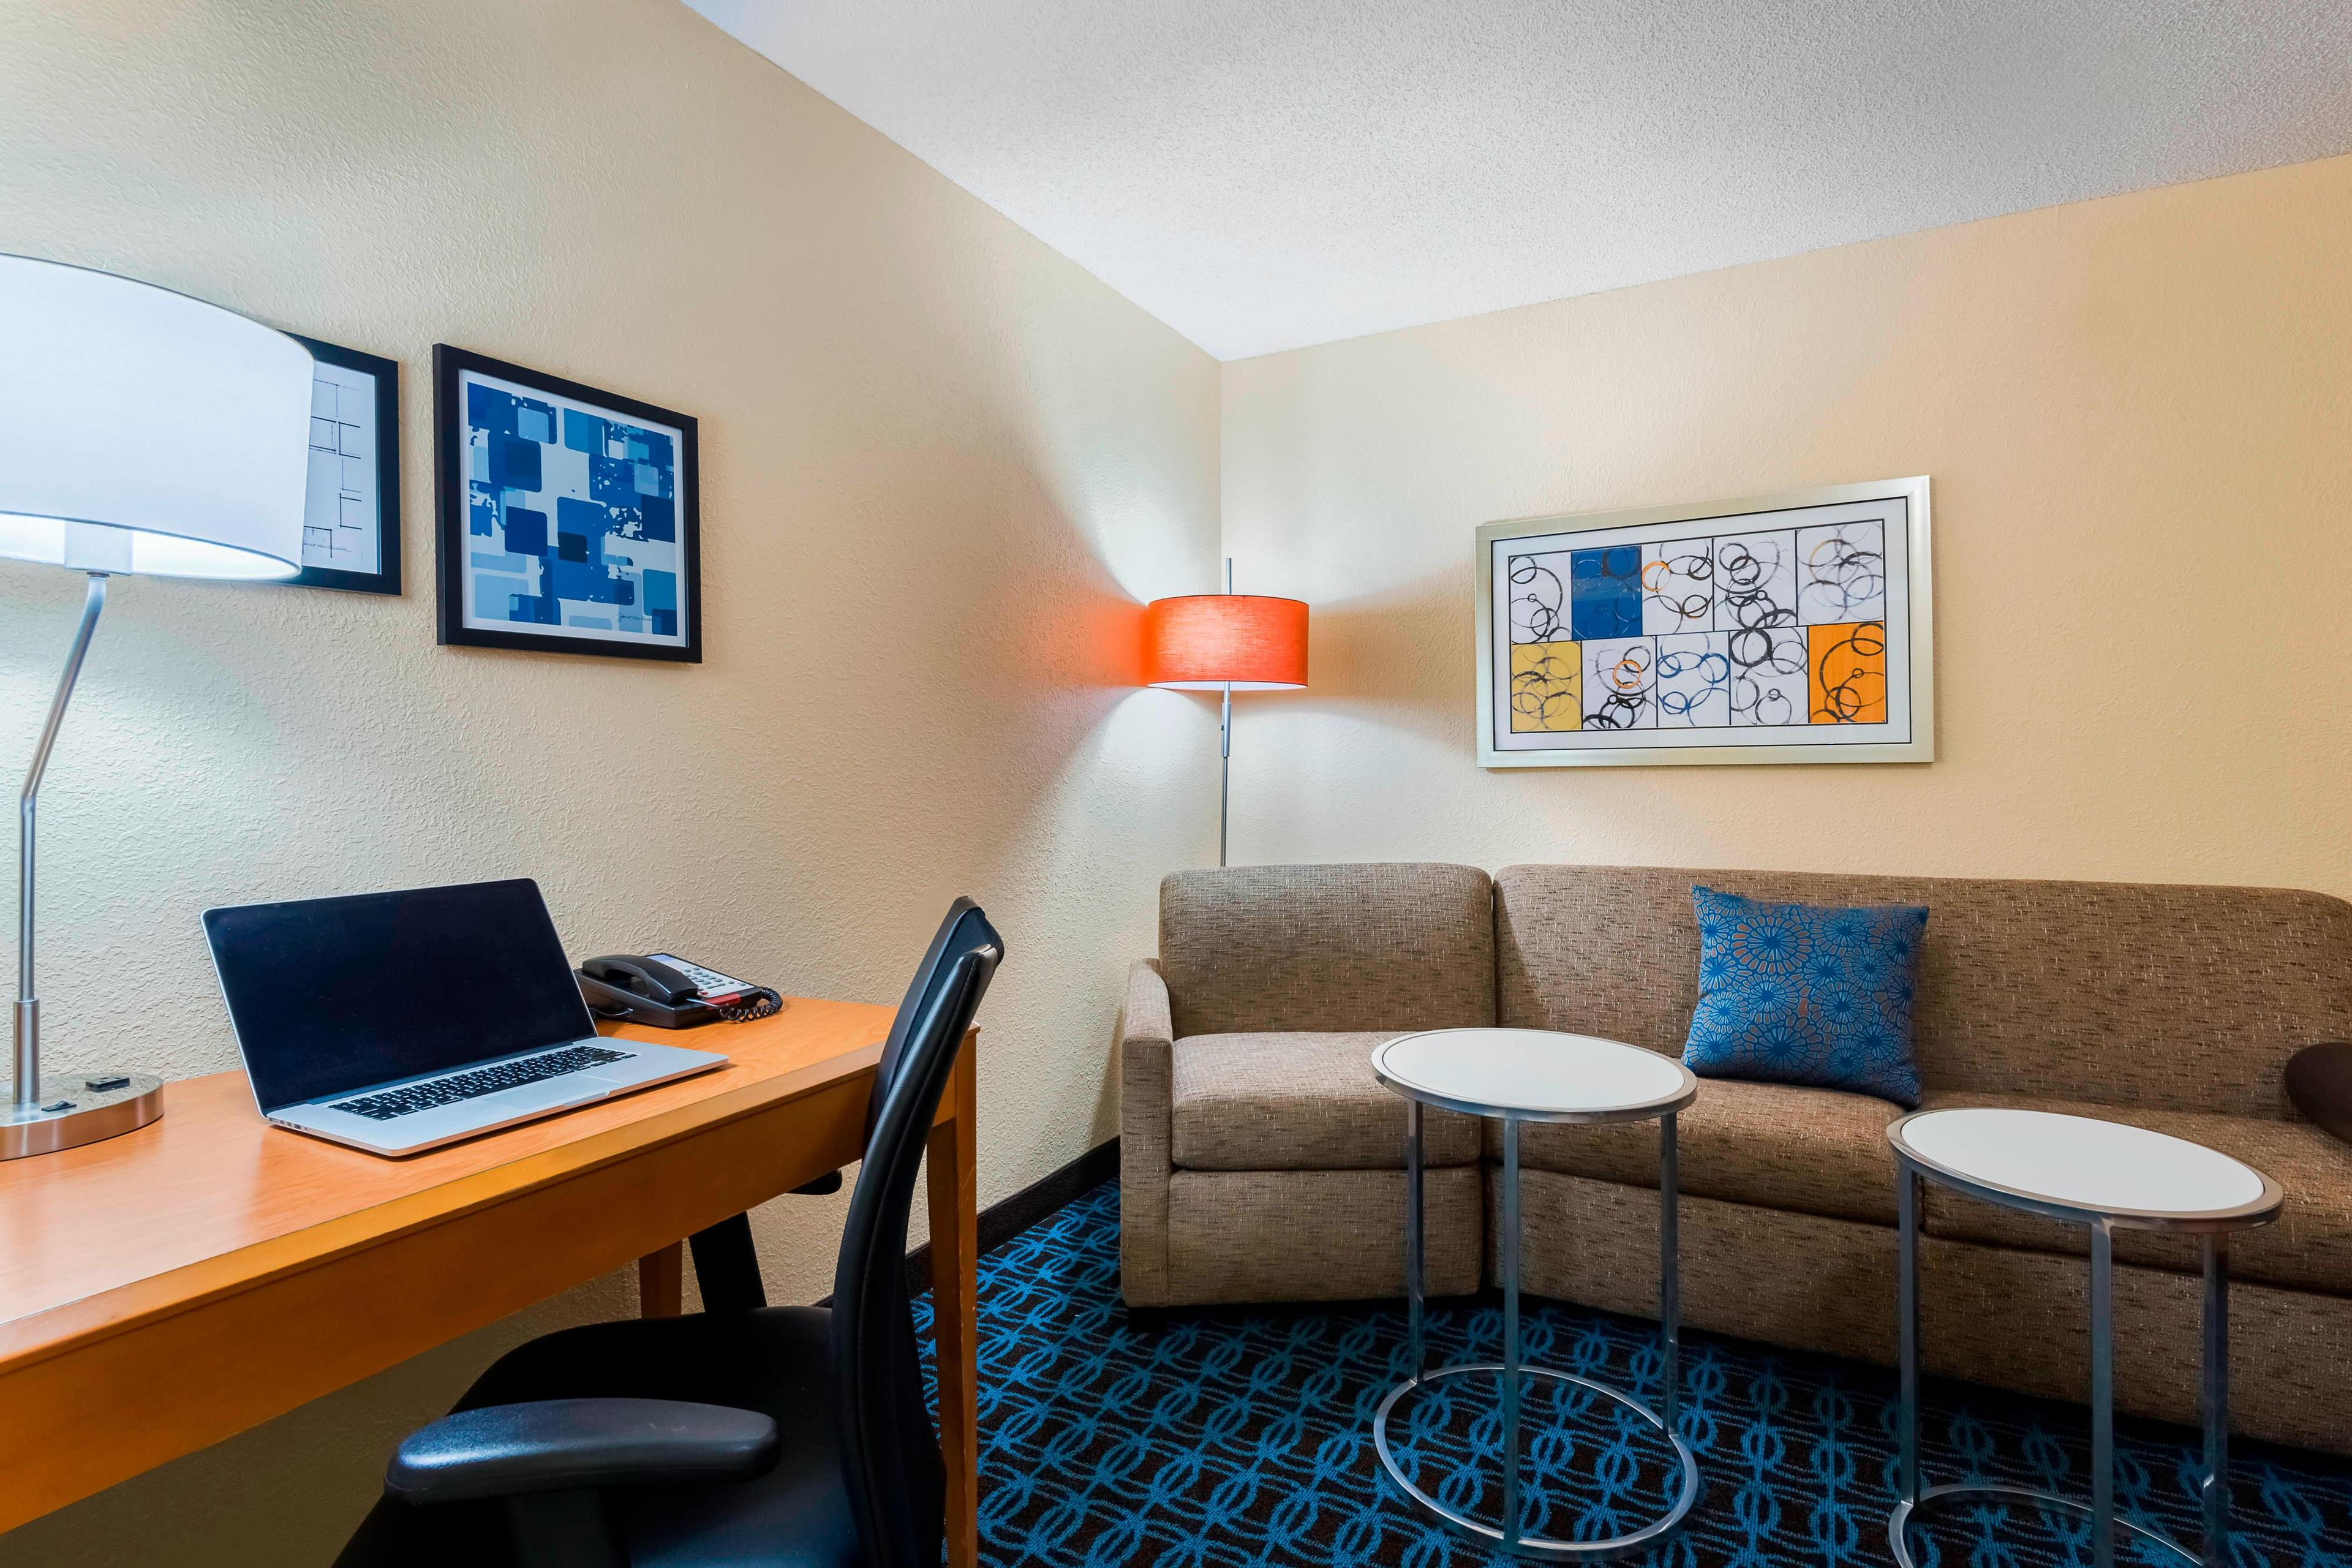 Full-featured and built for productivity, our King Studio Suites are perfect for business and leisure travel to the Mobile area.